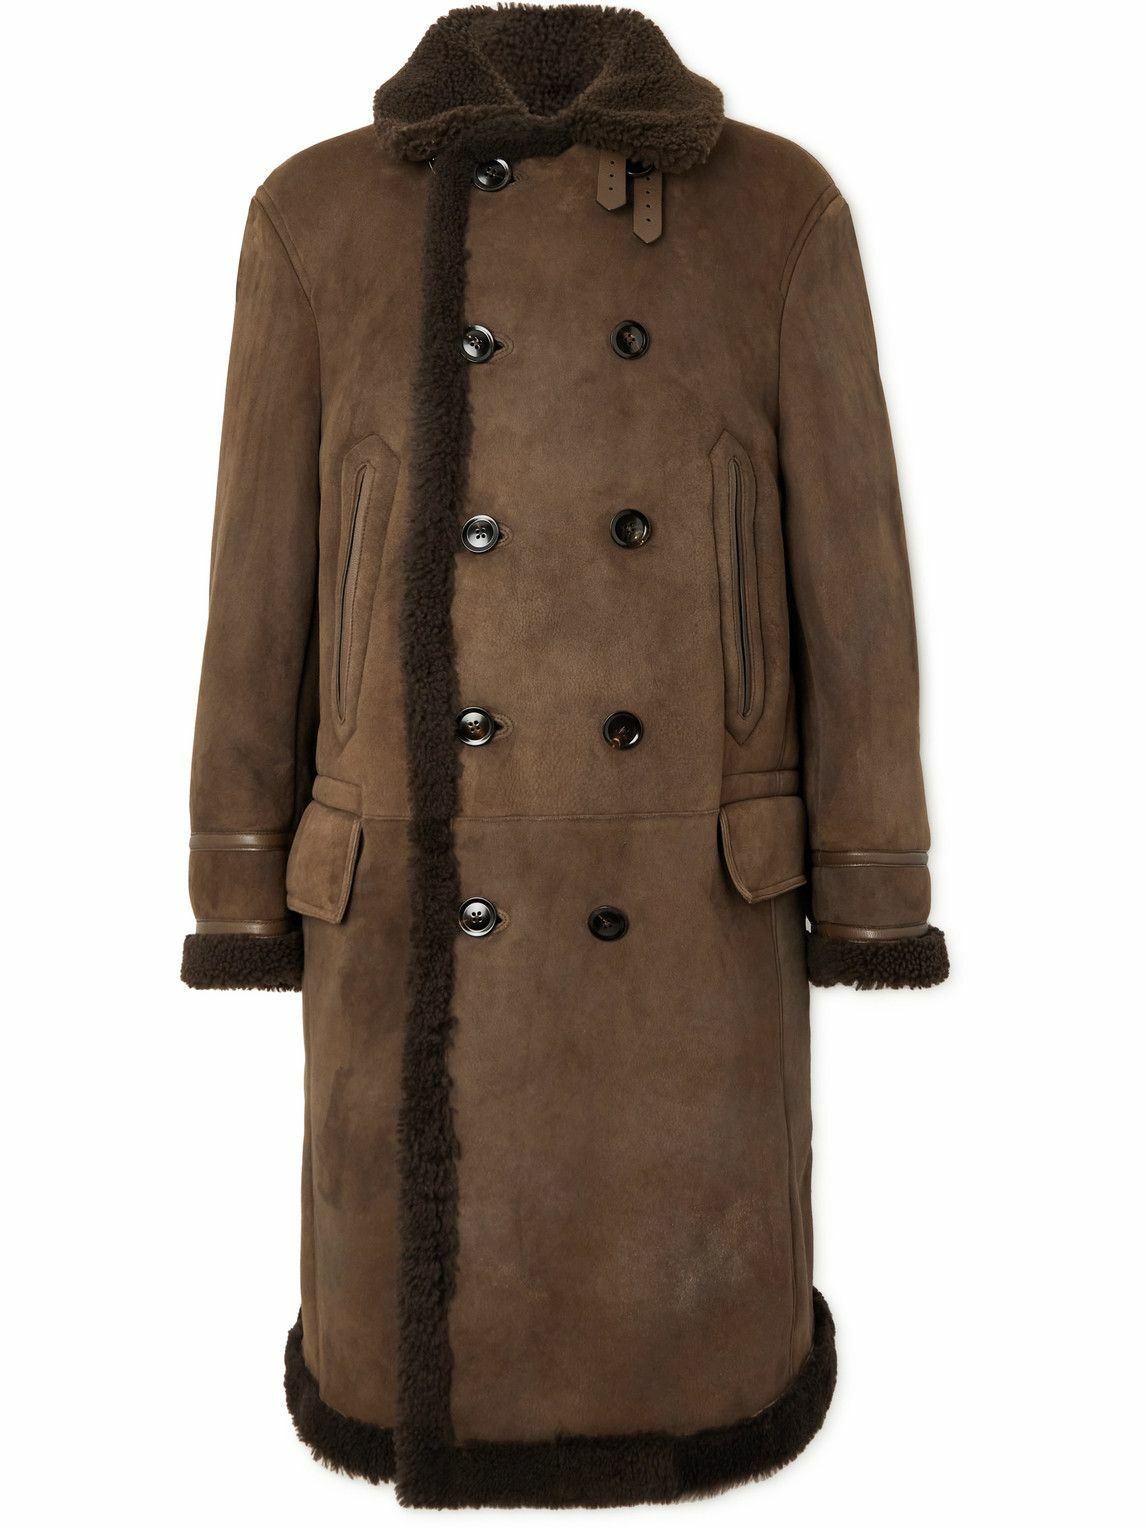 TOM FORD - Double-Breasted Shearling Overcoat - Brown TOM FORD